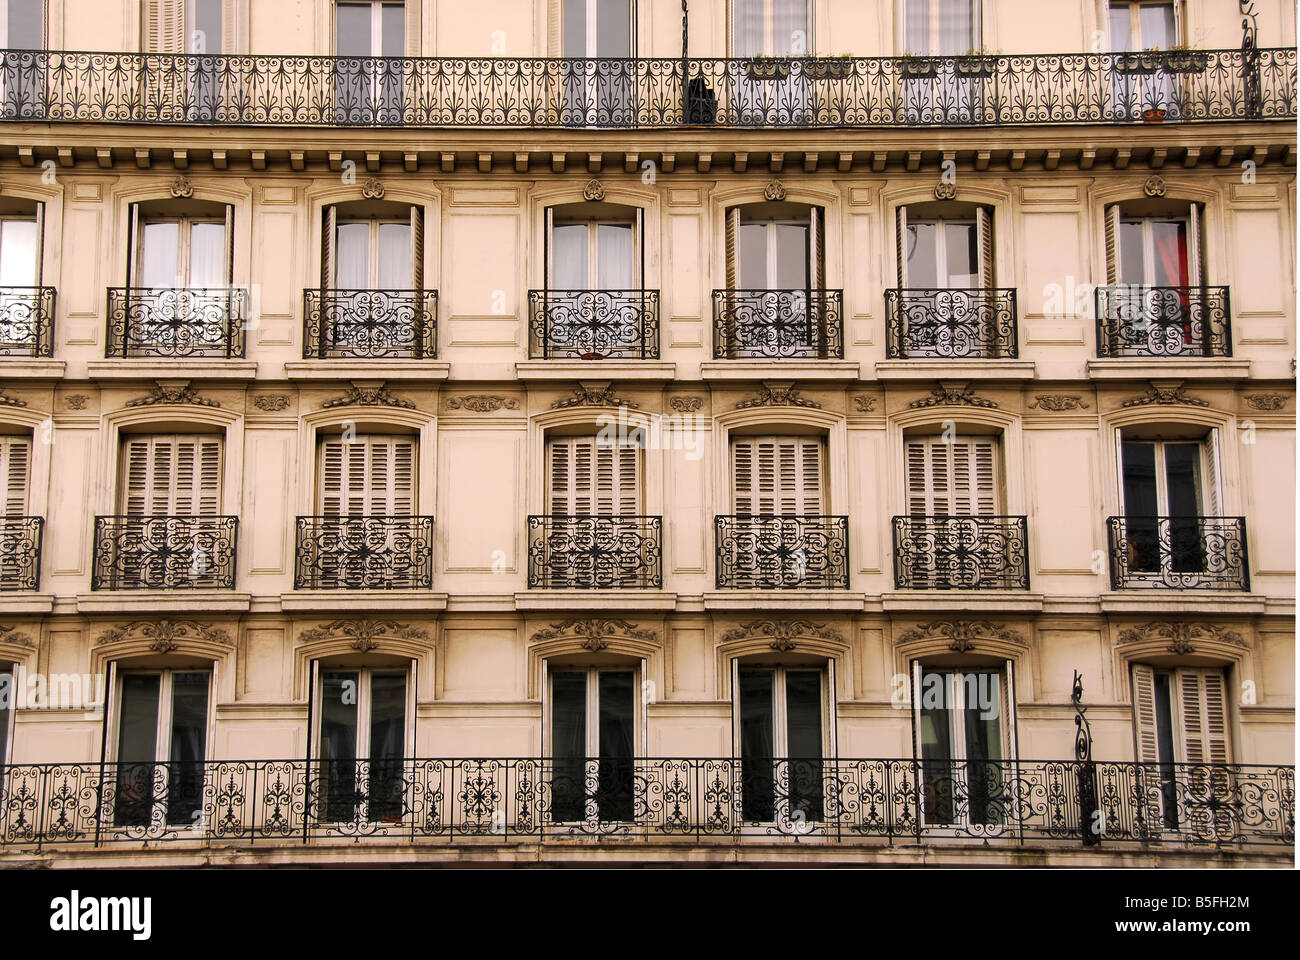 Windows and balconies of old apartment buildings in Paris France Stock Photo